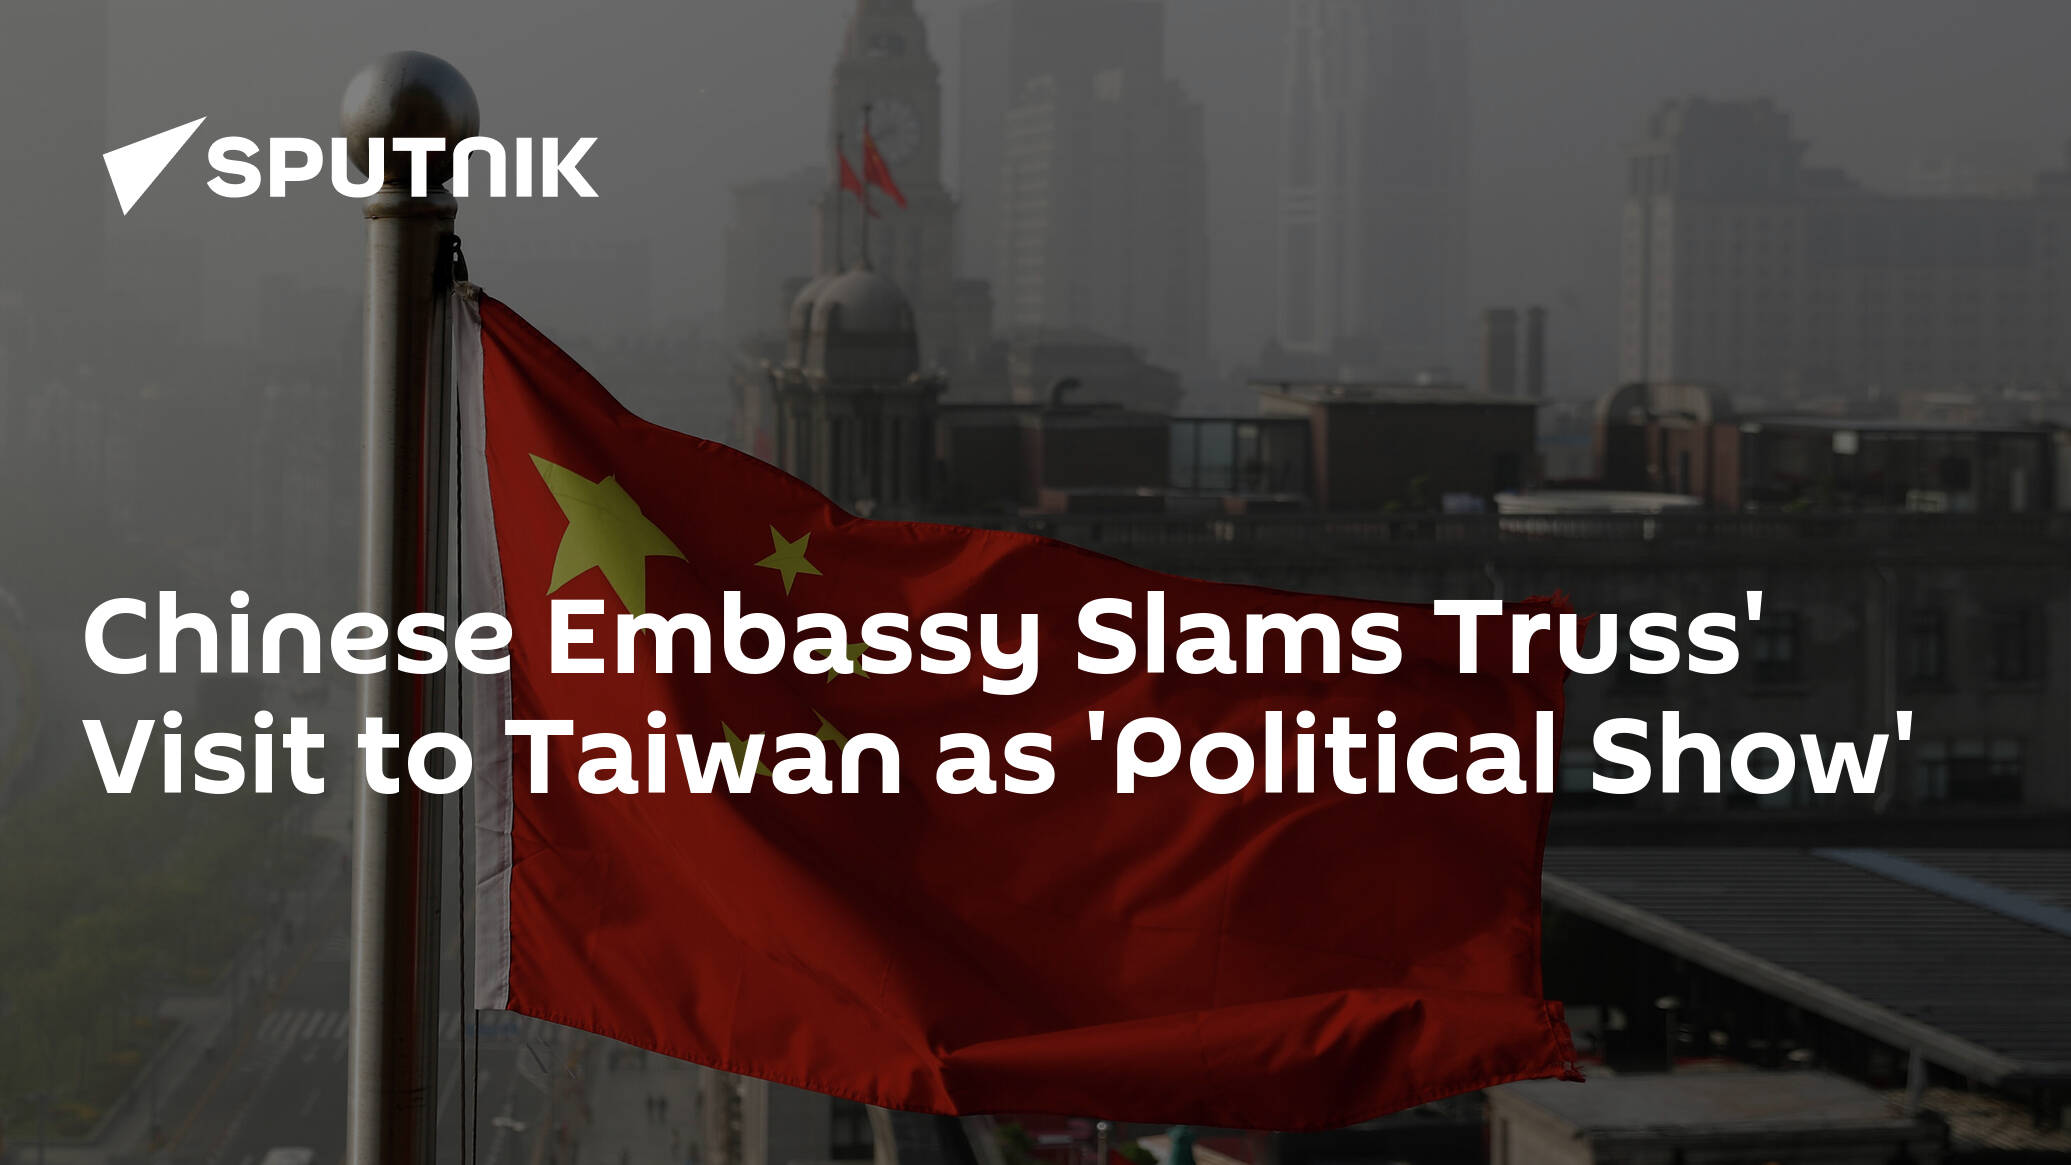 Chinese Embassy Slams Truss' Visit to Taiwan as 'Political Show'